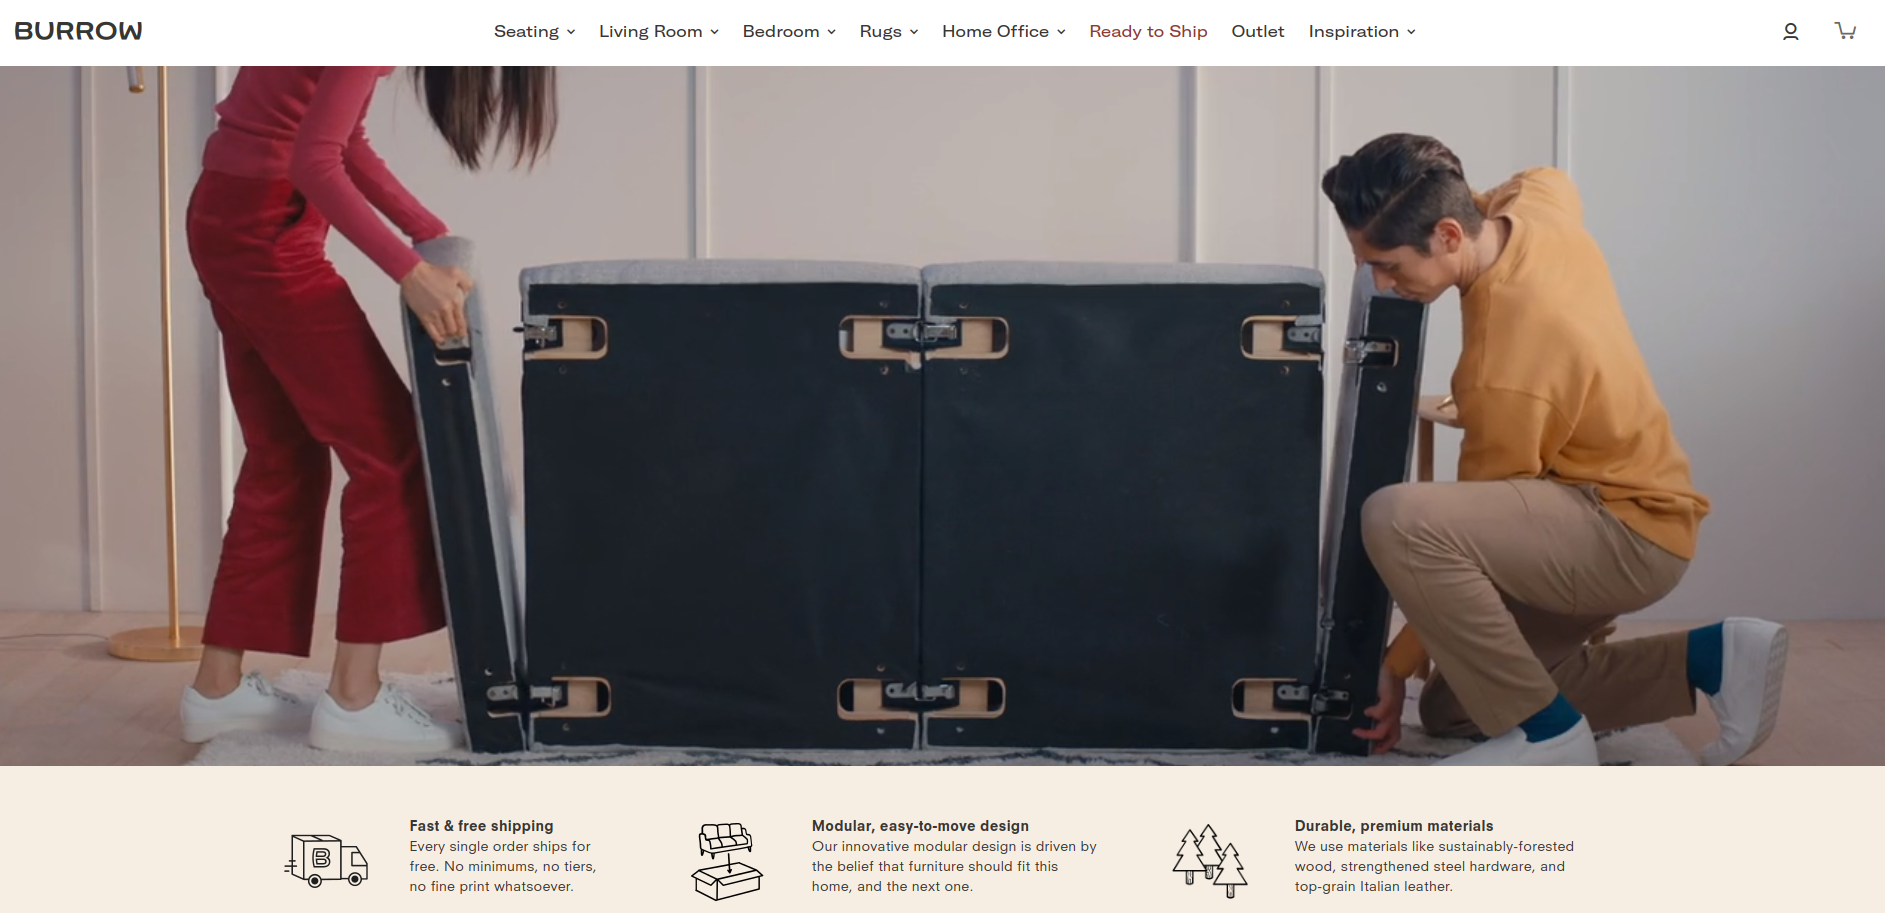 The Burrow ecommerce website uses the video showing how to assemble their furniture